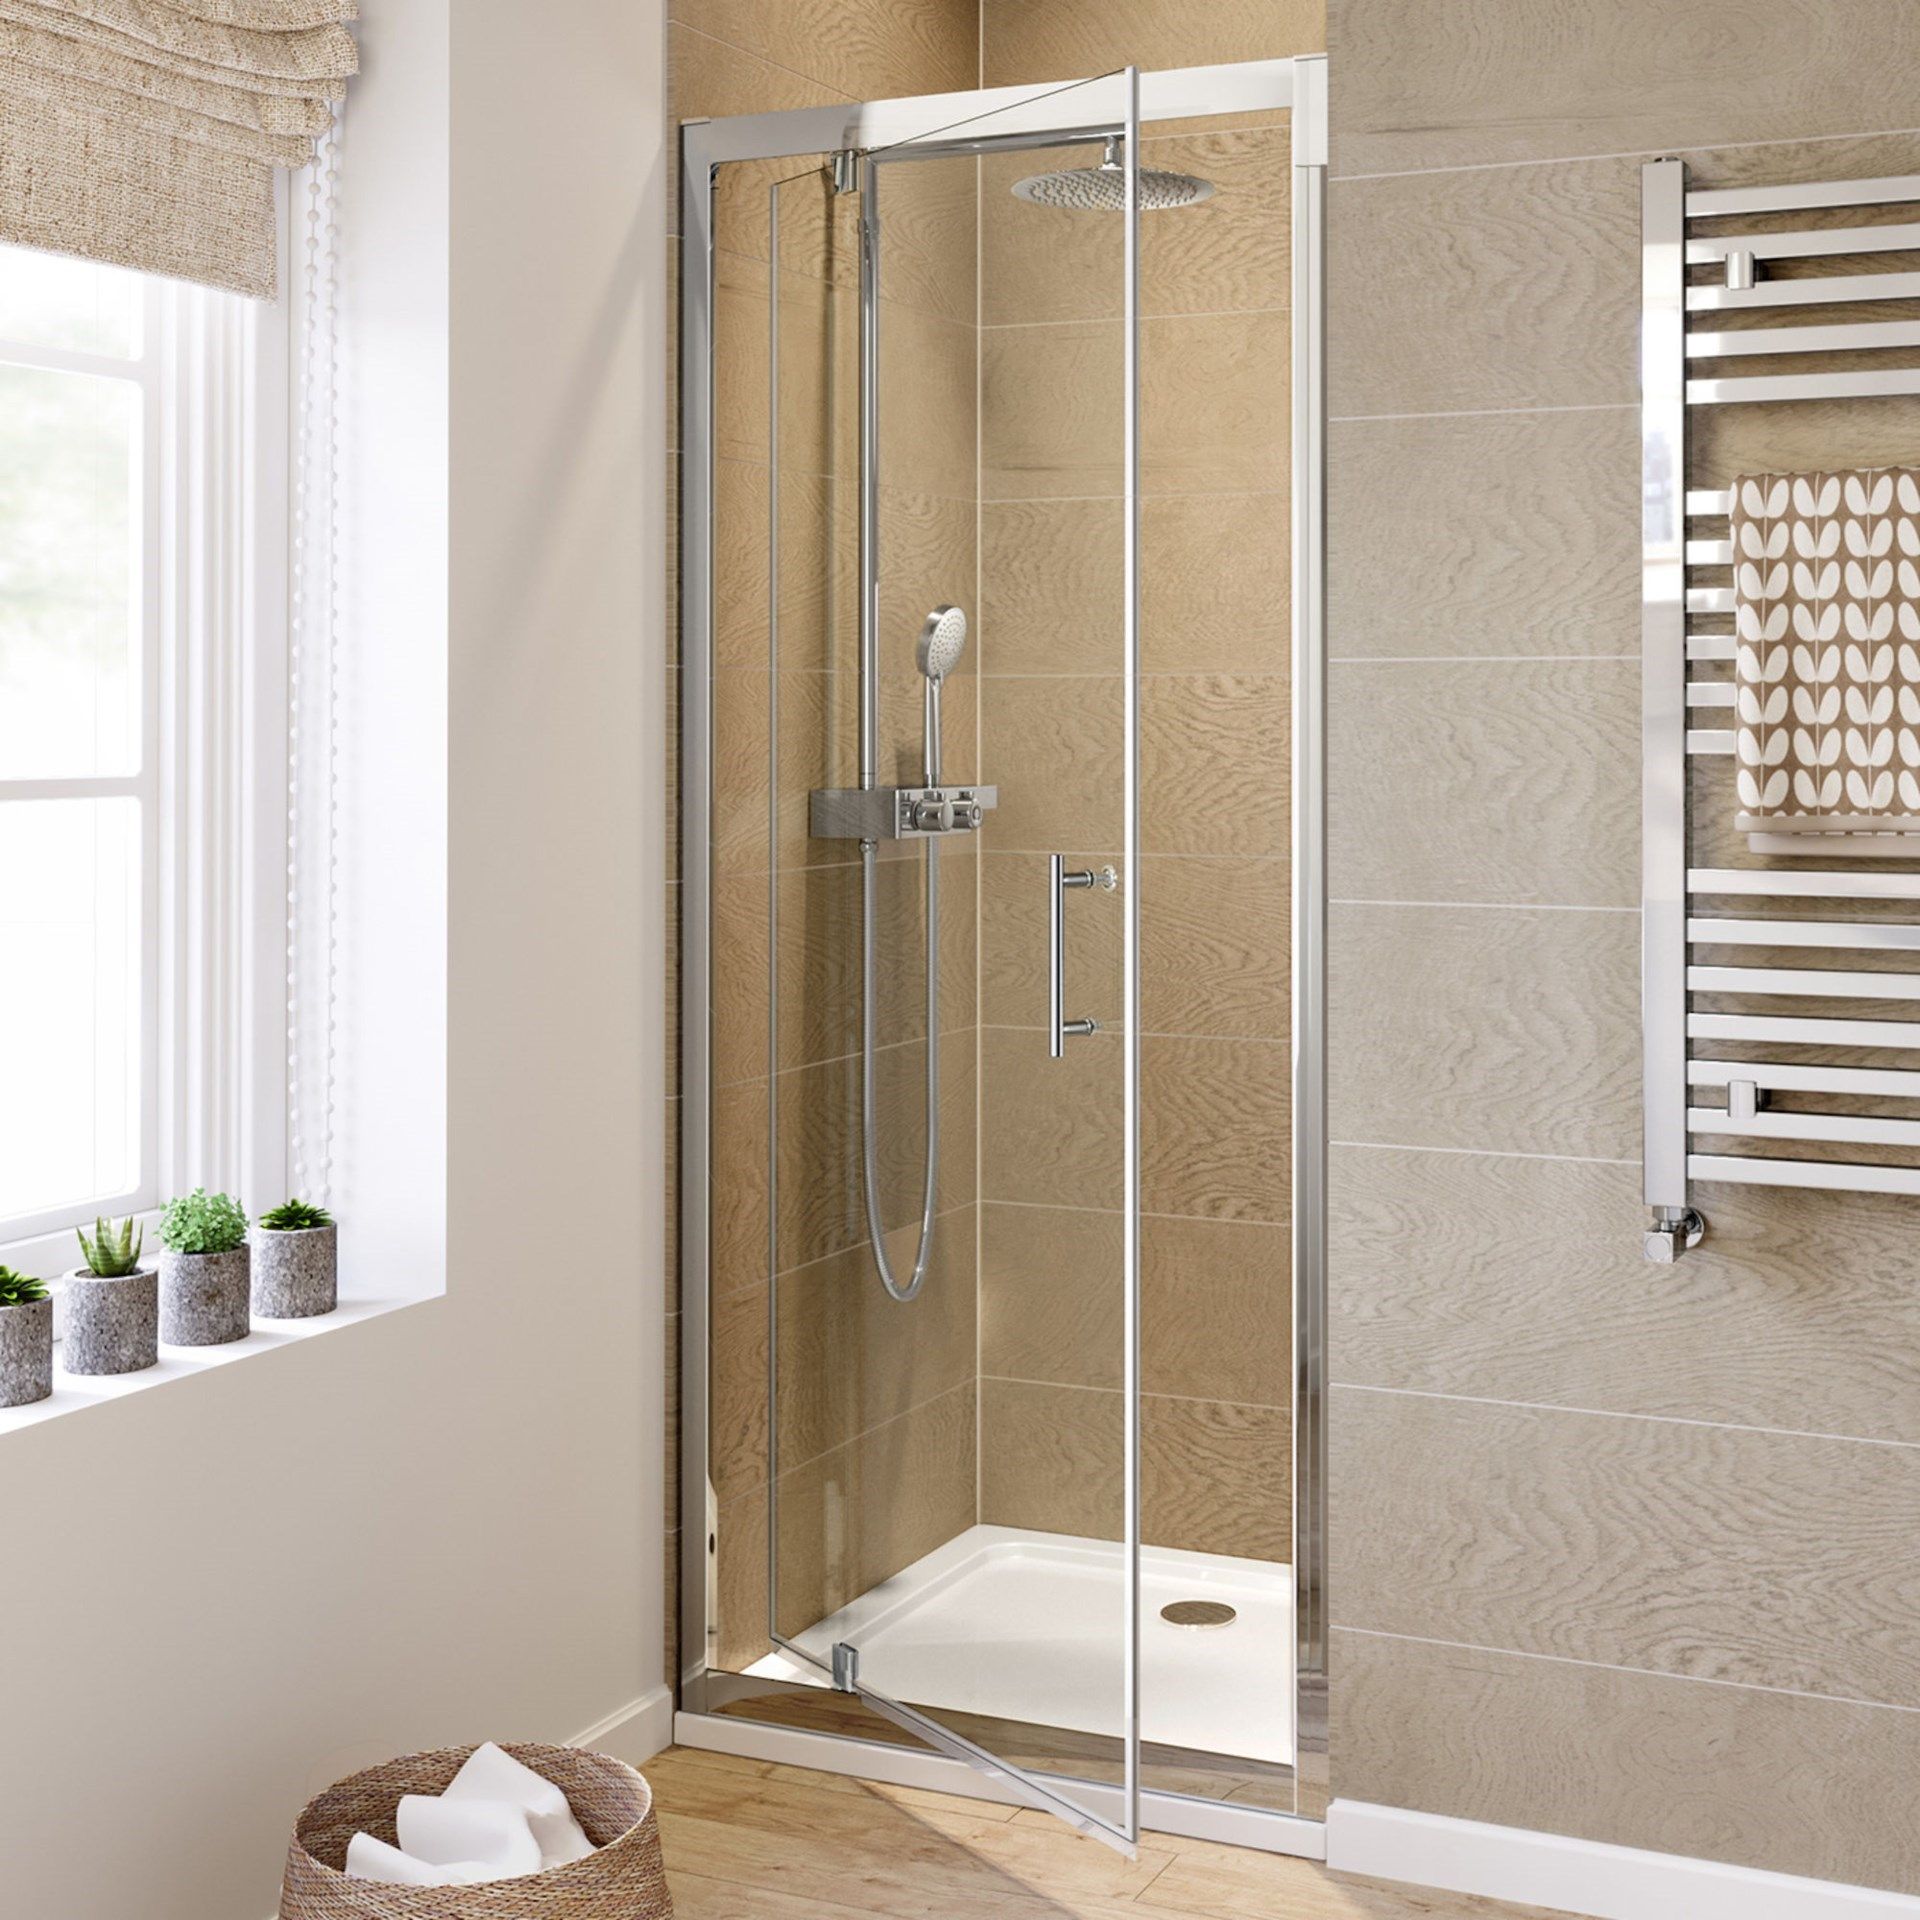 Twyfords 700mm - 6mm - Premium Pivot Shower Door. RRP £299.99.8mm Safety Glass Fully wate...